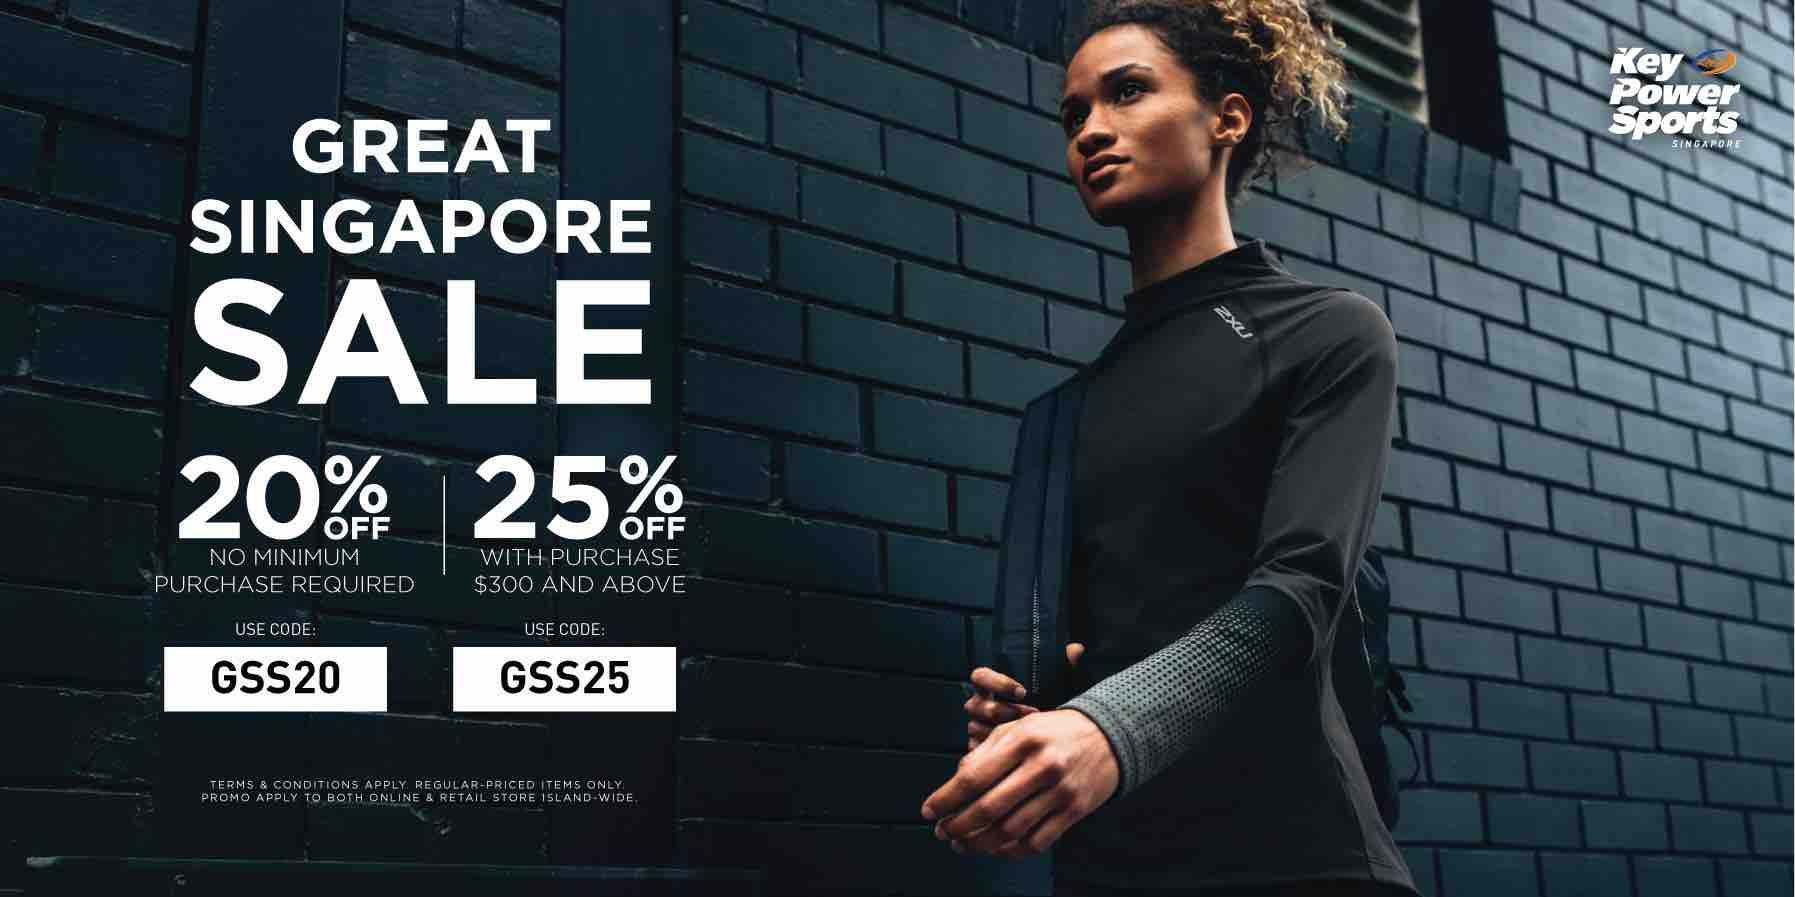 Key Power Sports Great Singapore Sale Up to 25% Off GSS25 Promo Code ends 30 Jun 2017